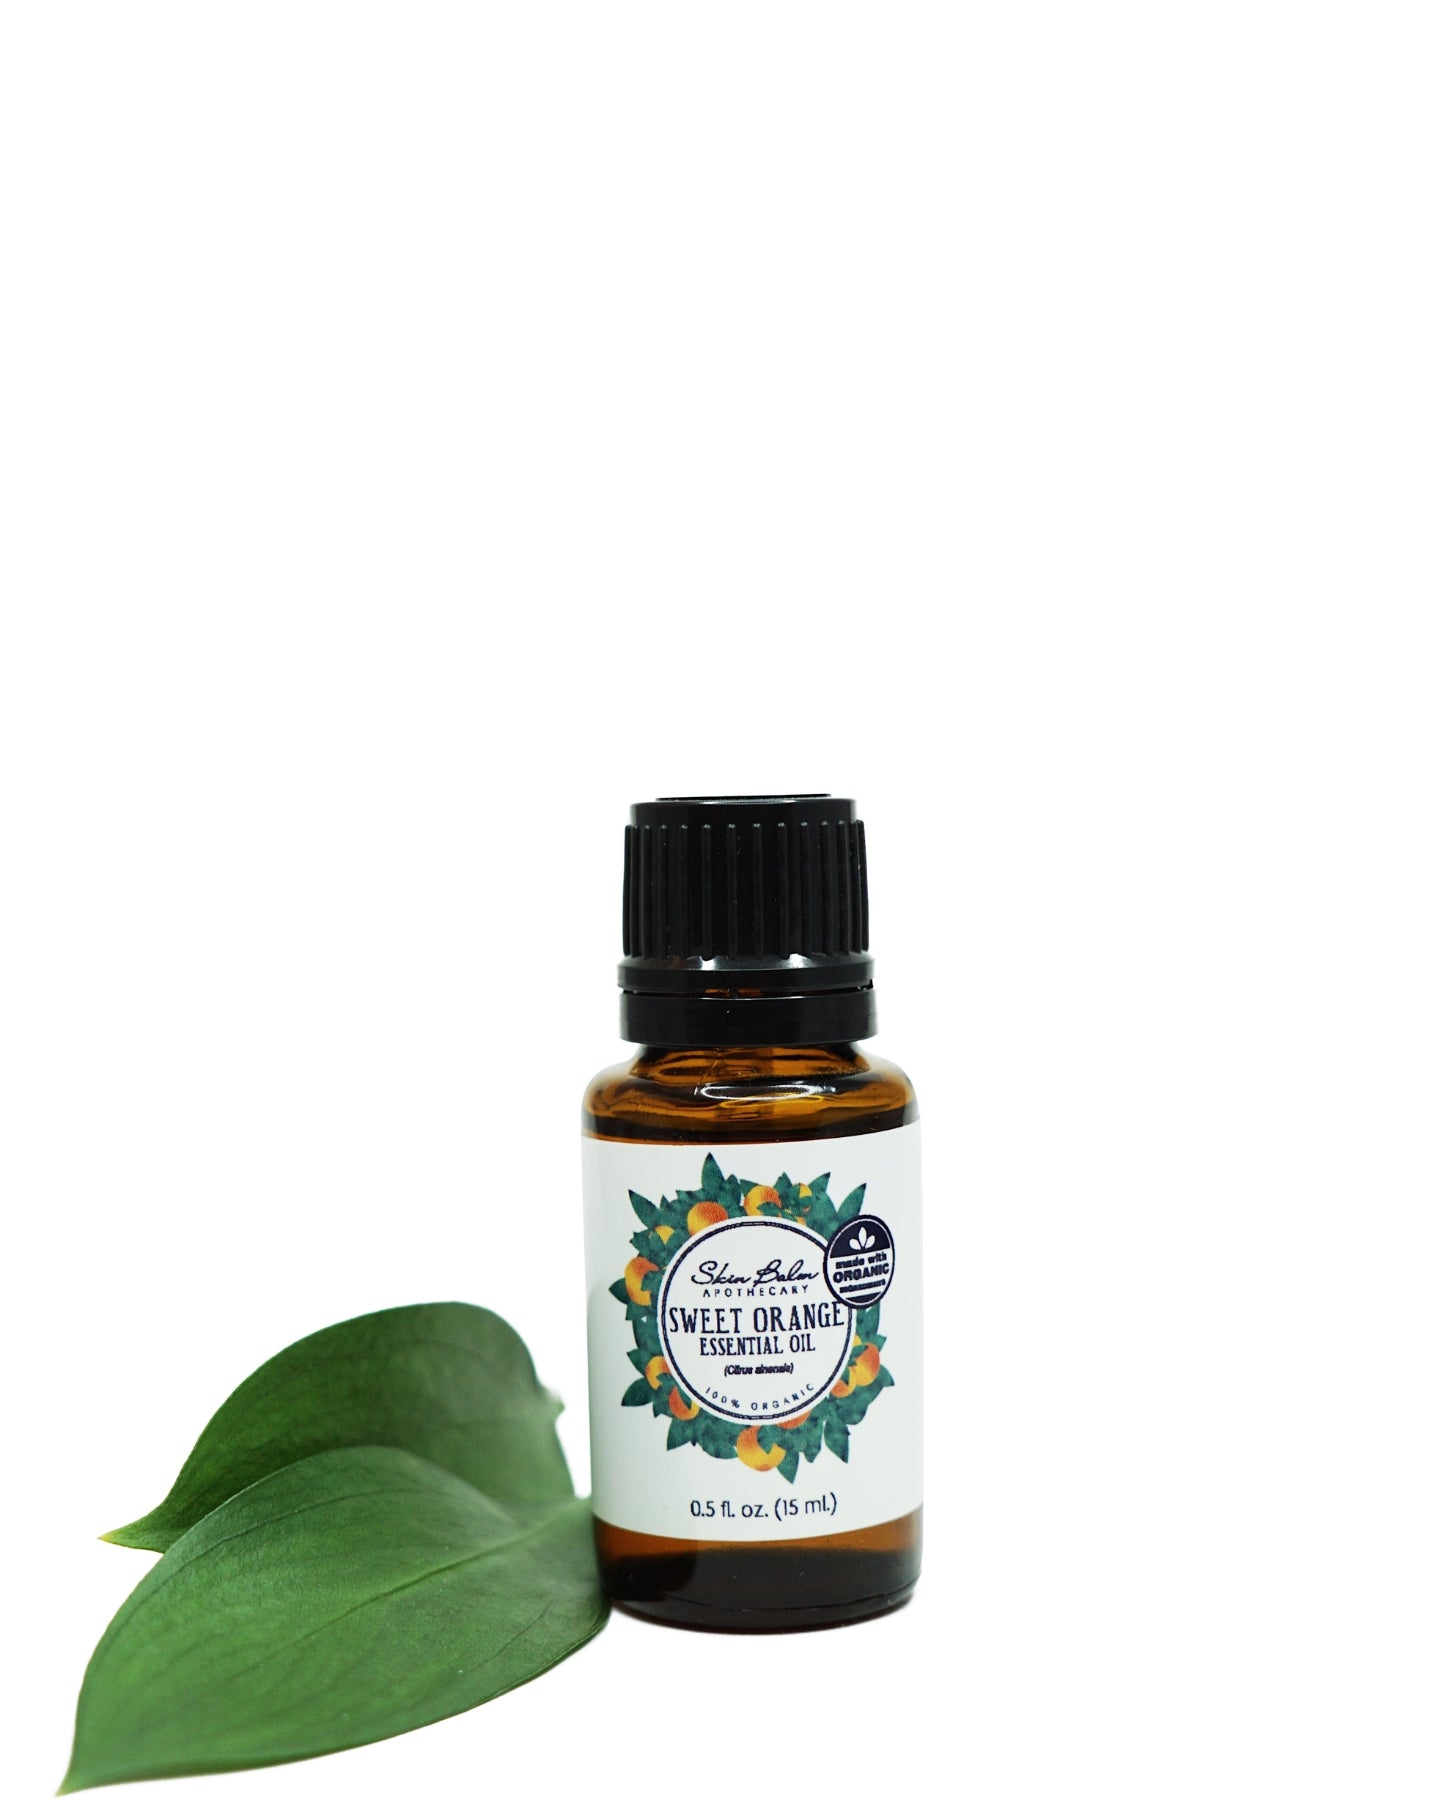 Organic Orange Essential Oil with green leaf against a white background.